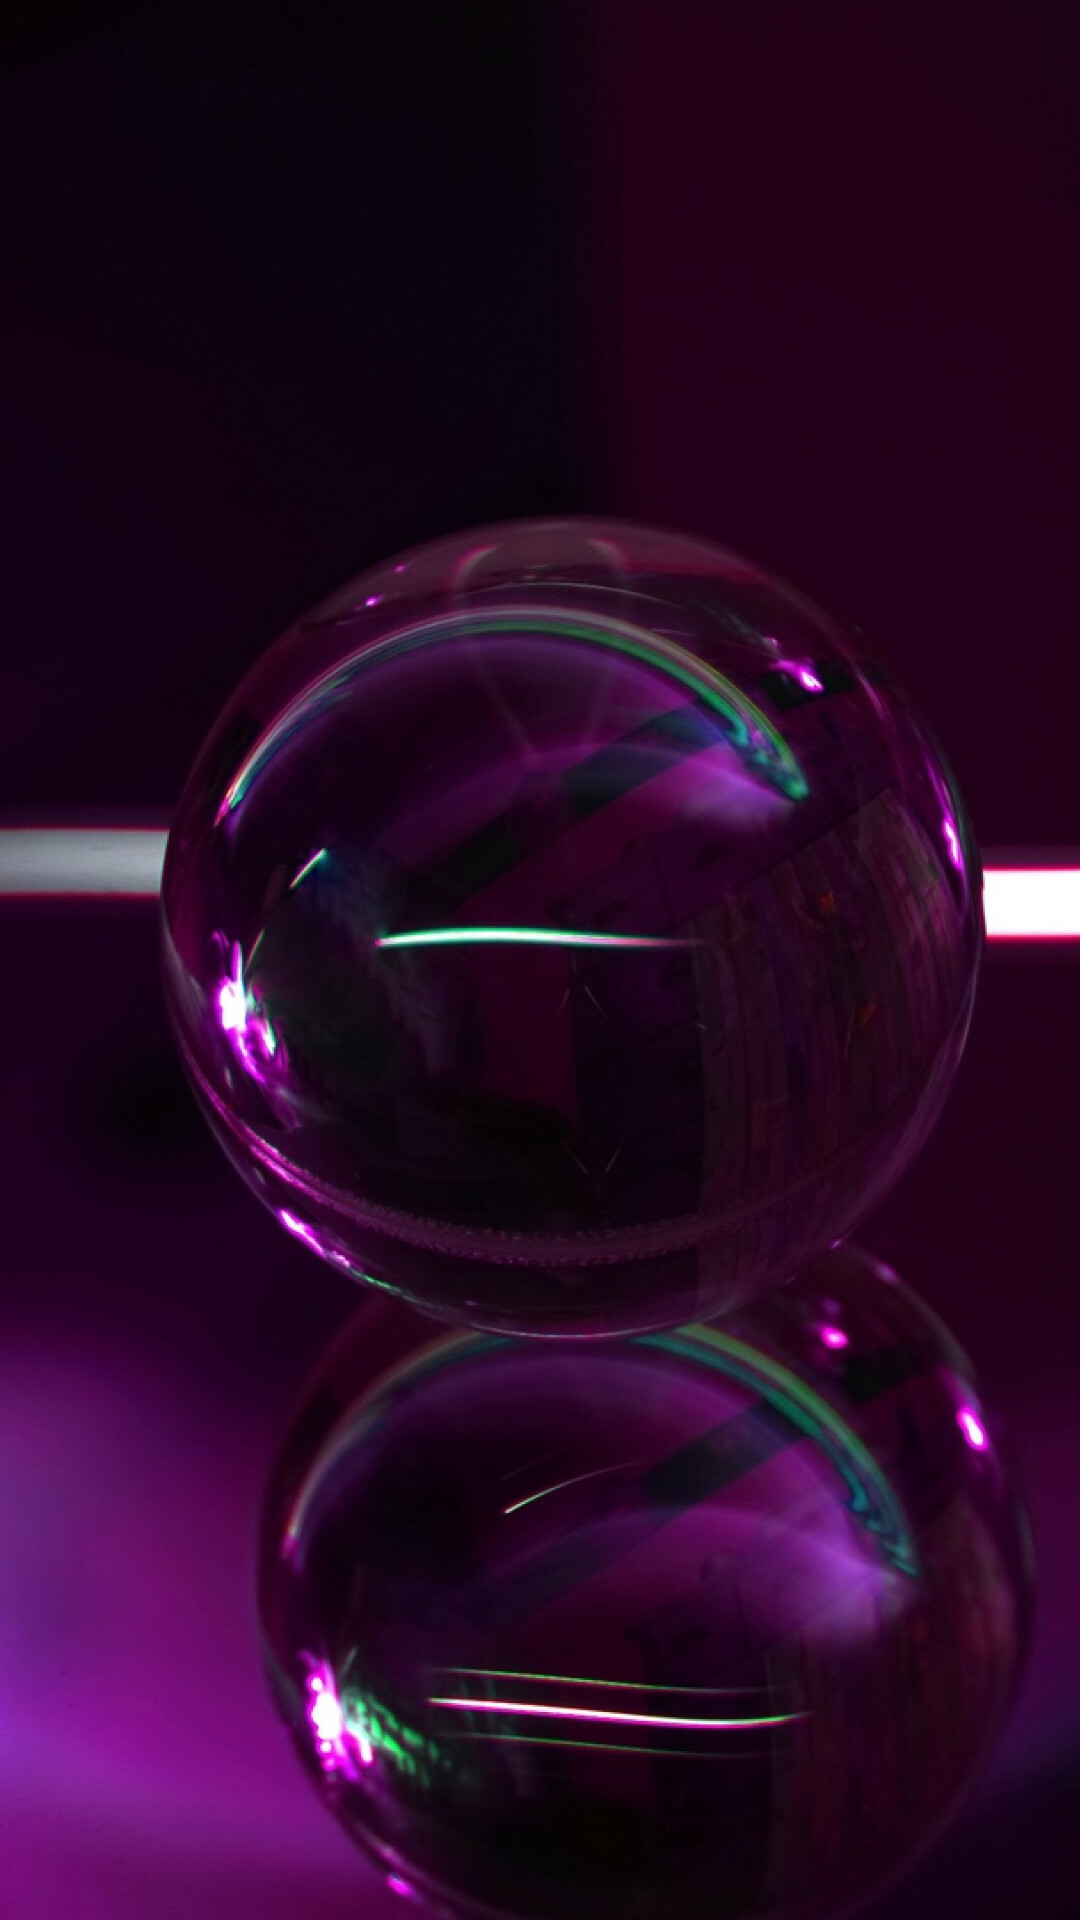 Glass: Purple sphere, A non-crystalline often transparent amorphous solid. 1080x1920 Full HD Wallpaper.